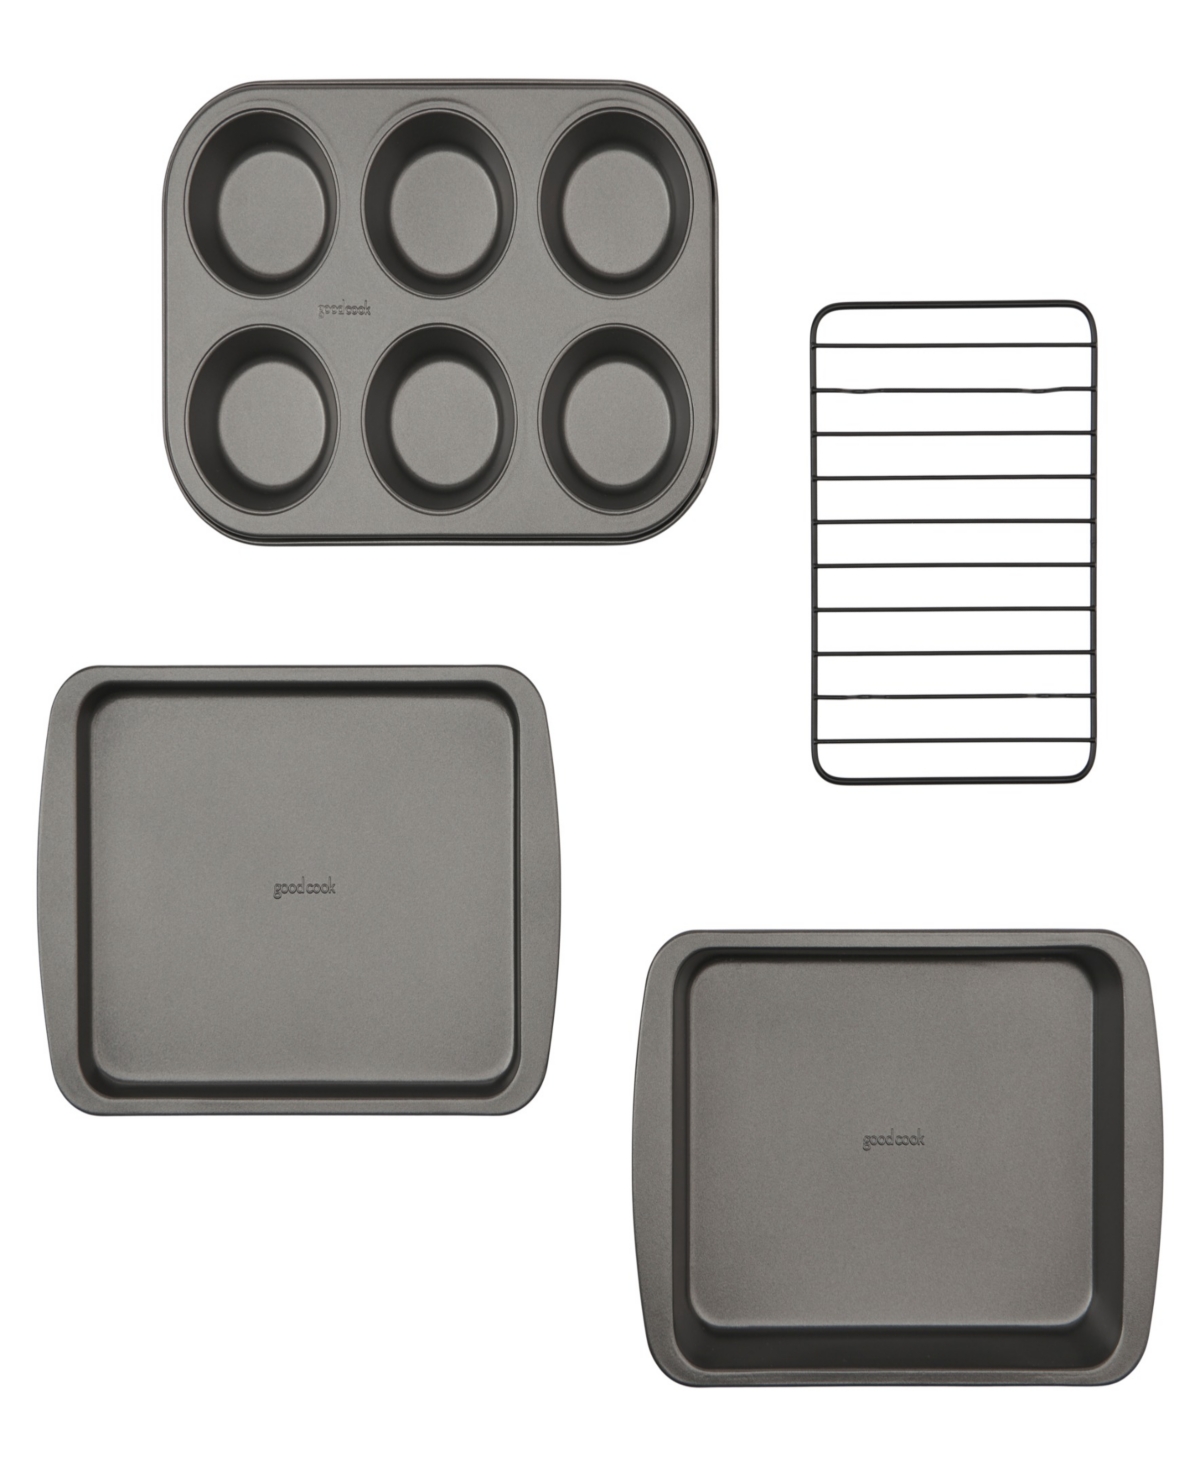 Good Cook 4 Piece Nonstick Steel Toaster Oven Set With Sheet Pan, Rack, Cake Pan, And Muffin Pan In Gray